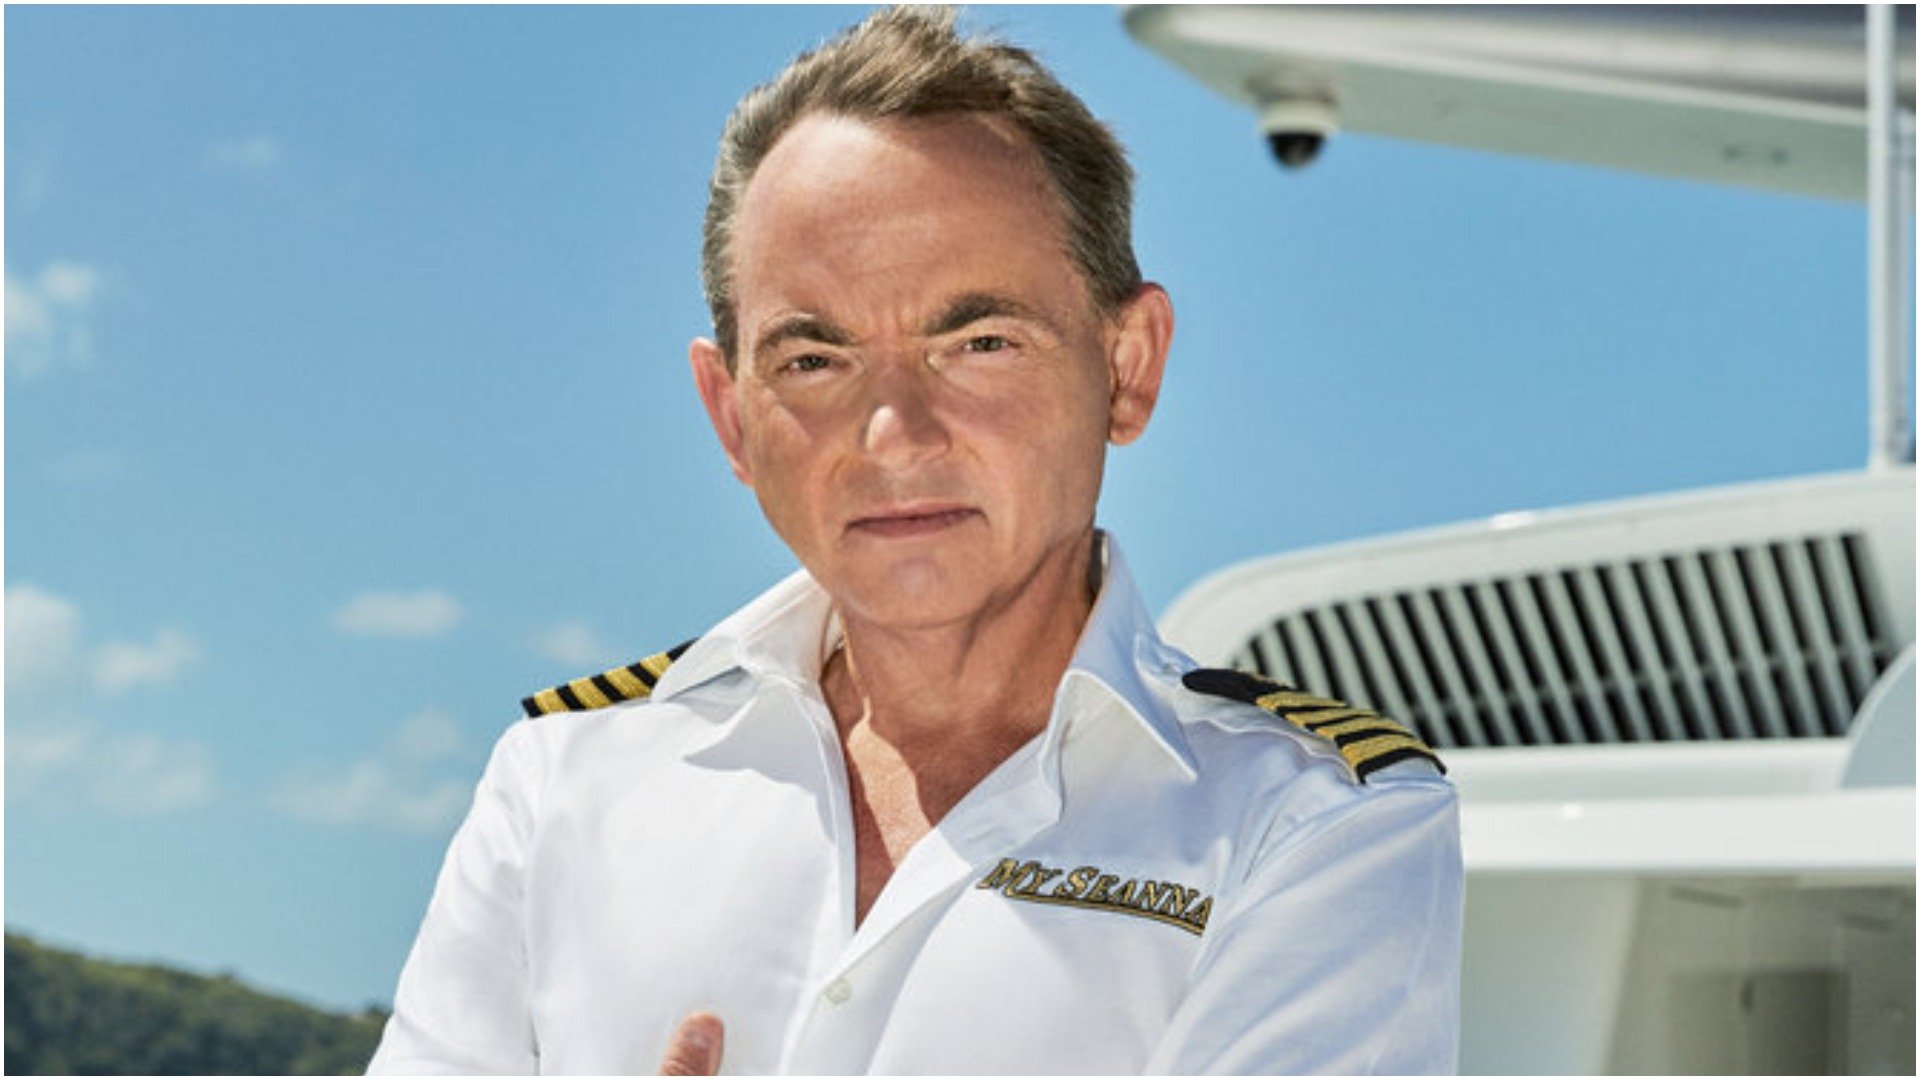 Captain Sean Meagher from Below Deck cast photo